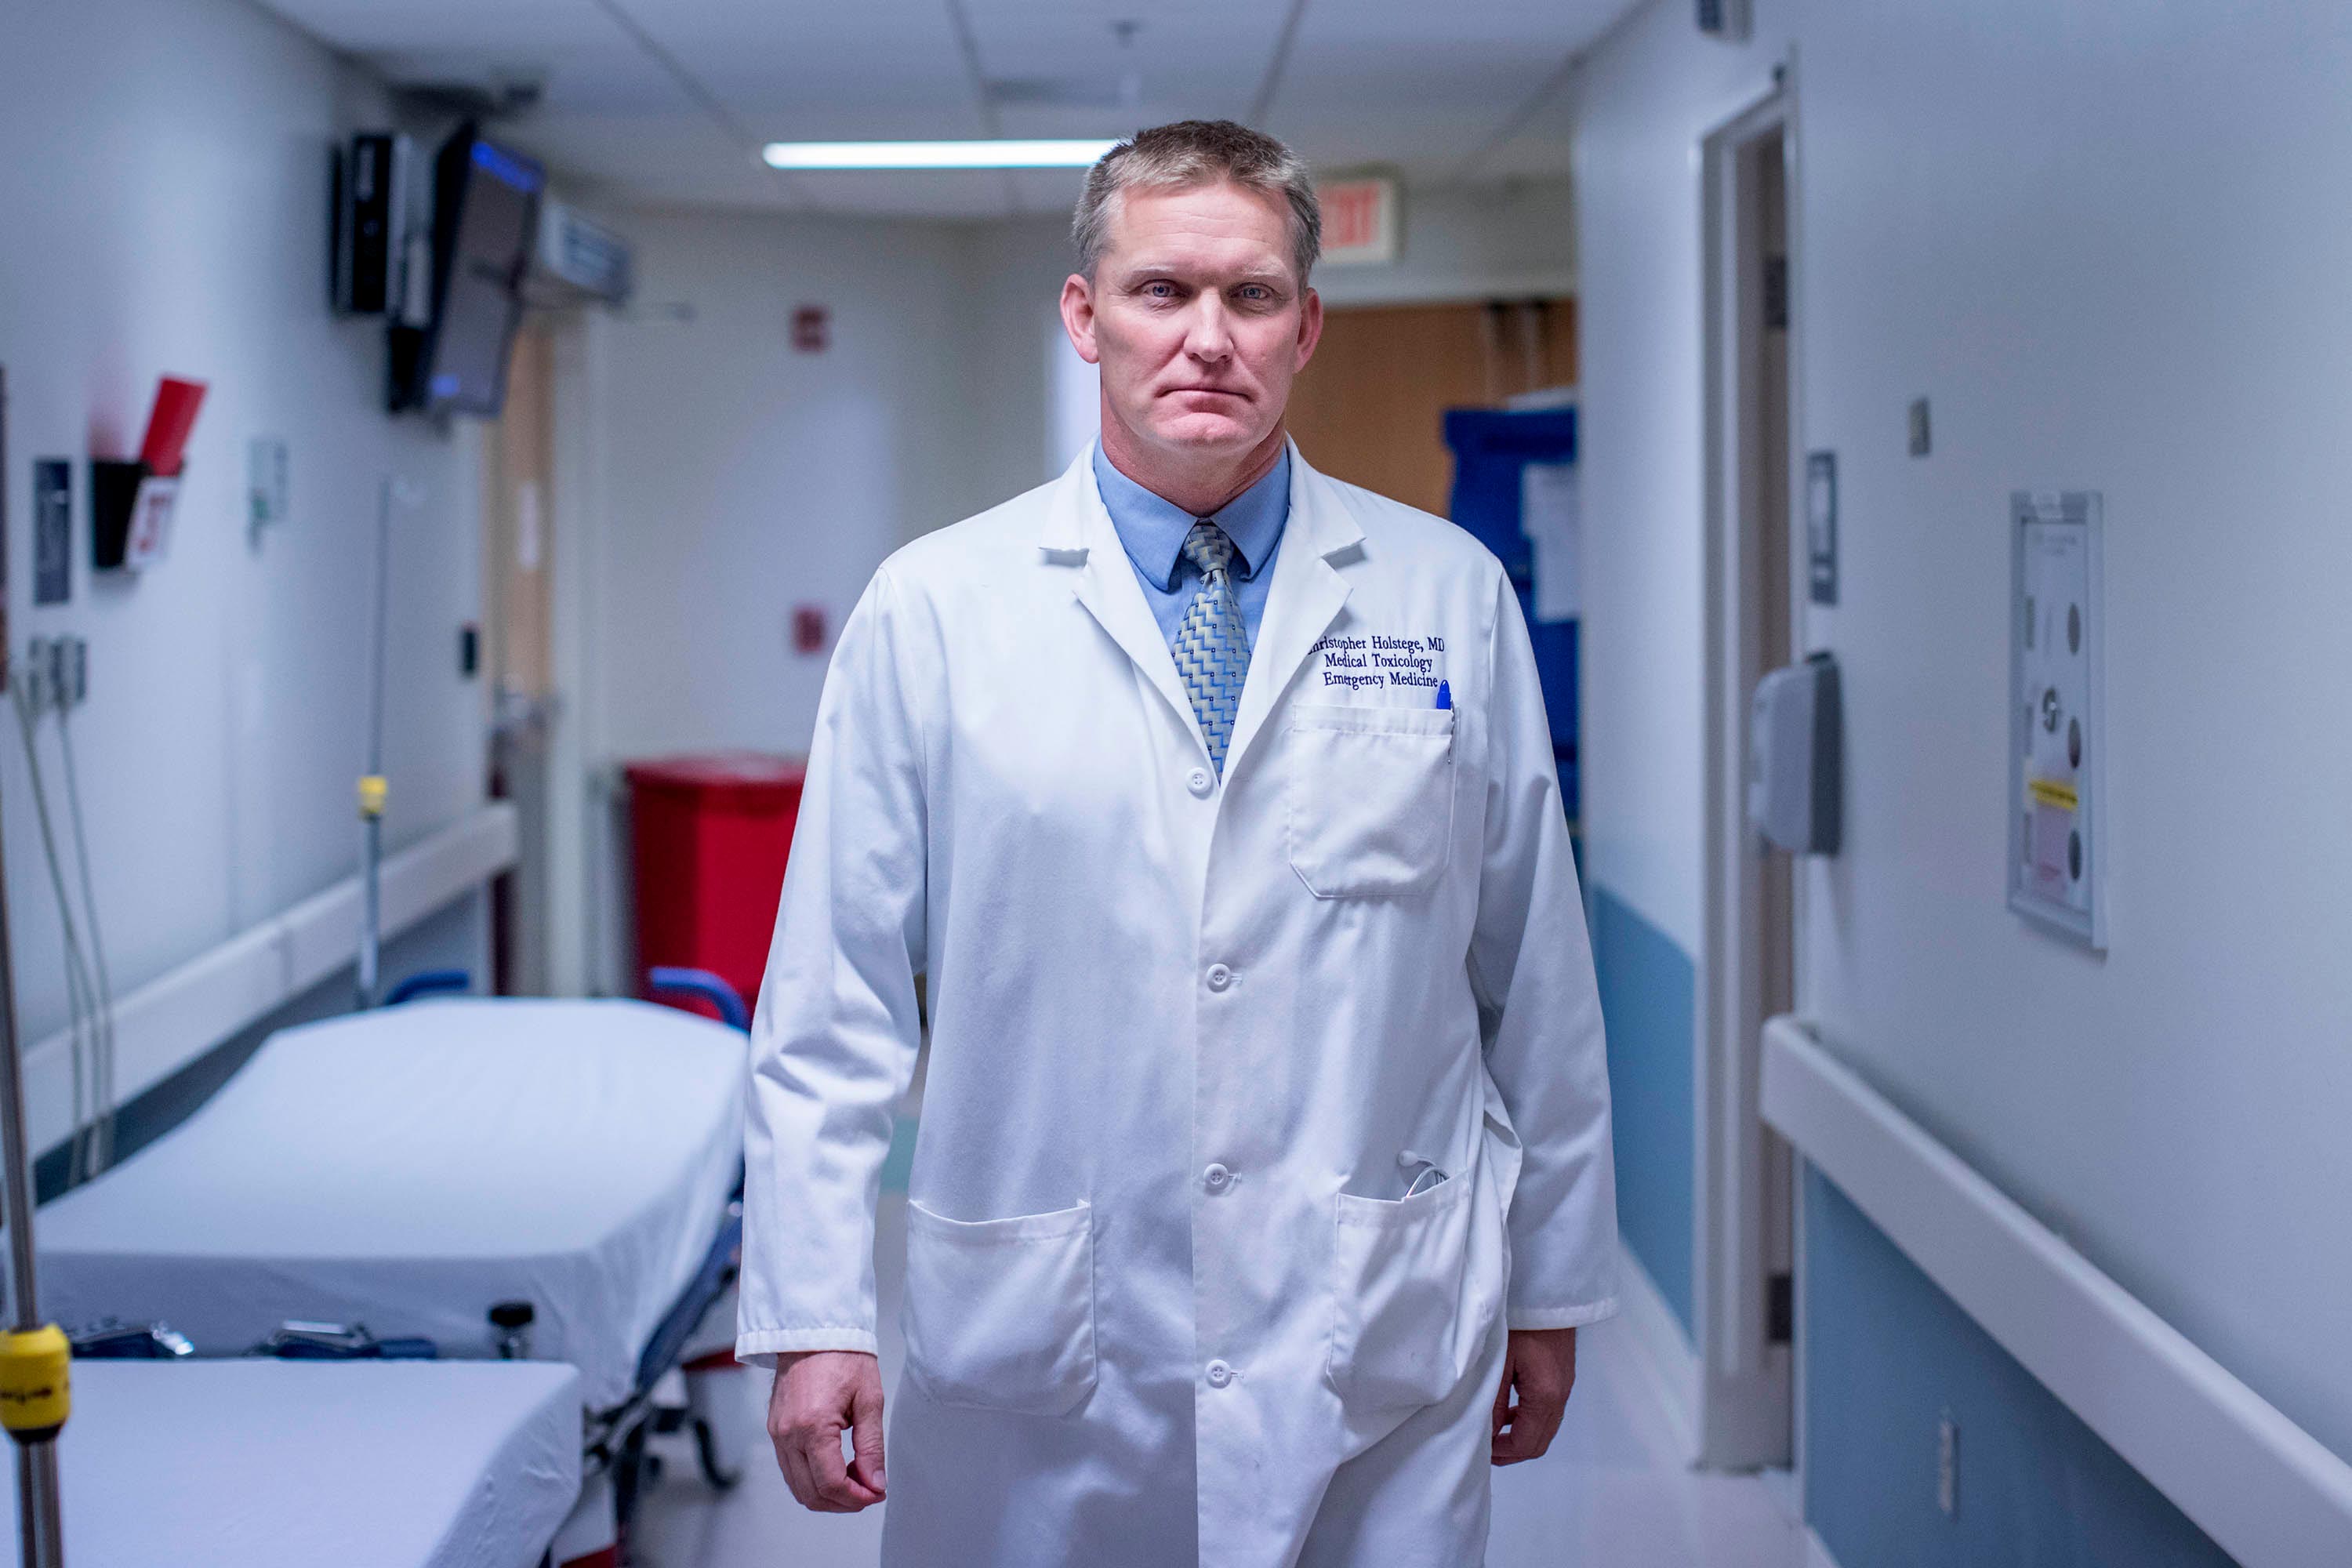 Chris Holstege in a white coat, poses for a portrait in an emergency room hallway